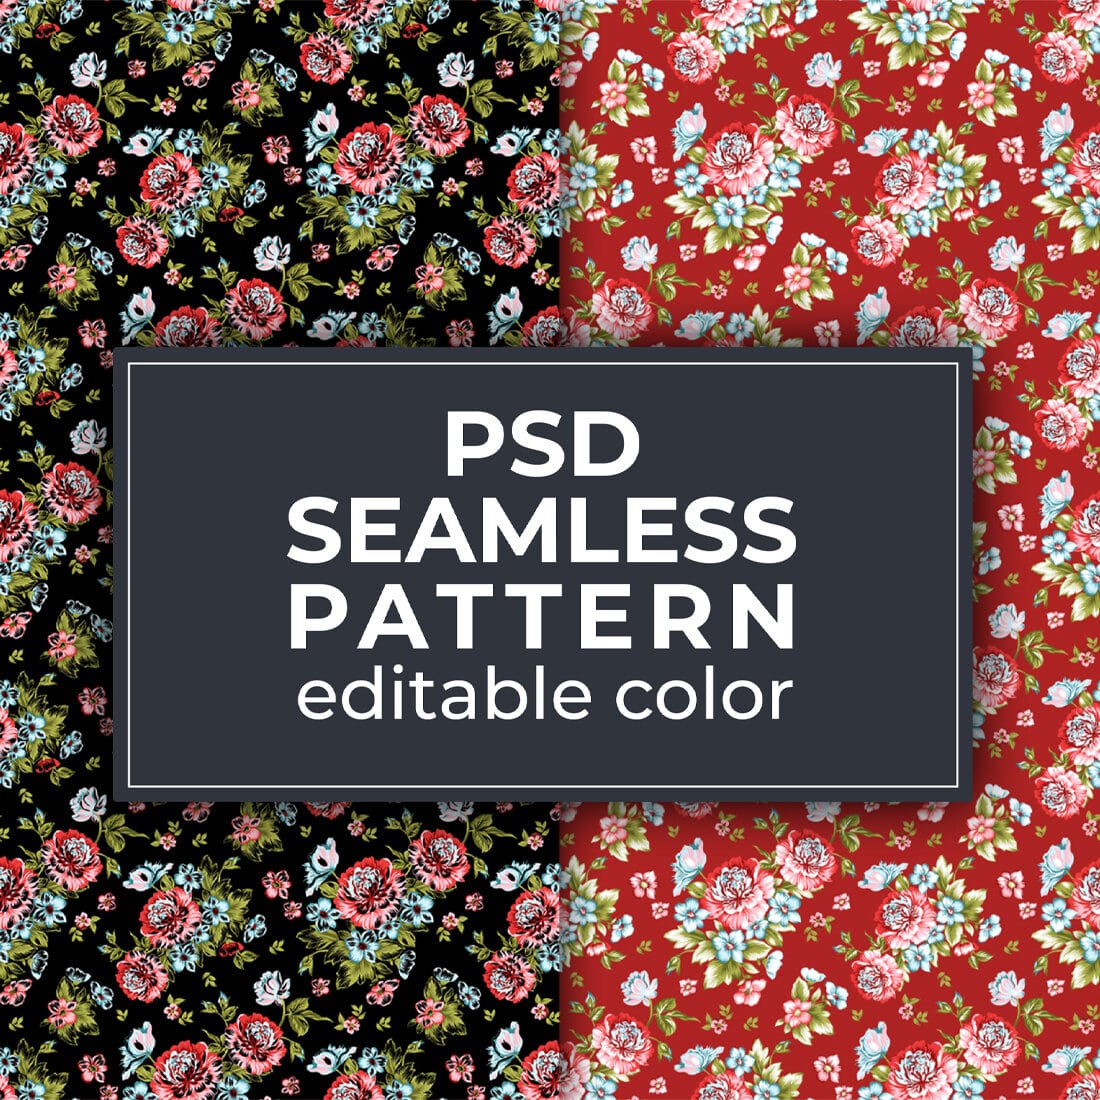 Set of four floral patterns with the text psd seamless pattern.